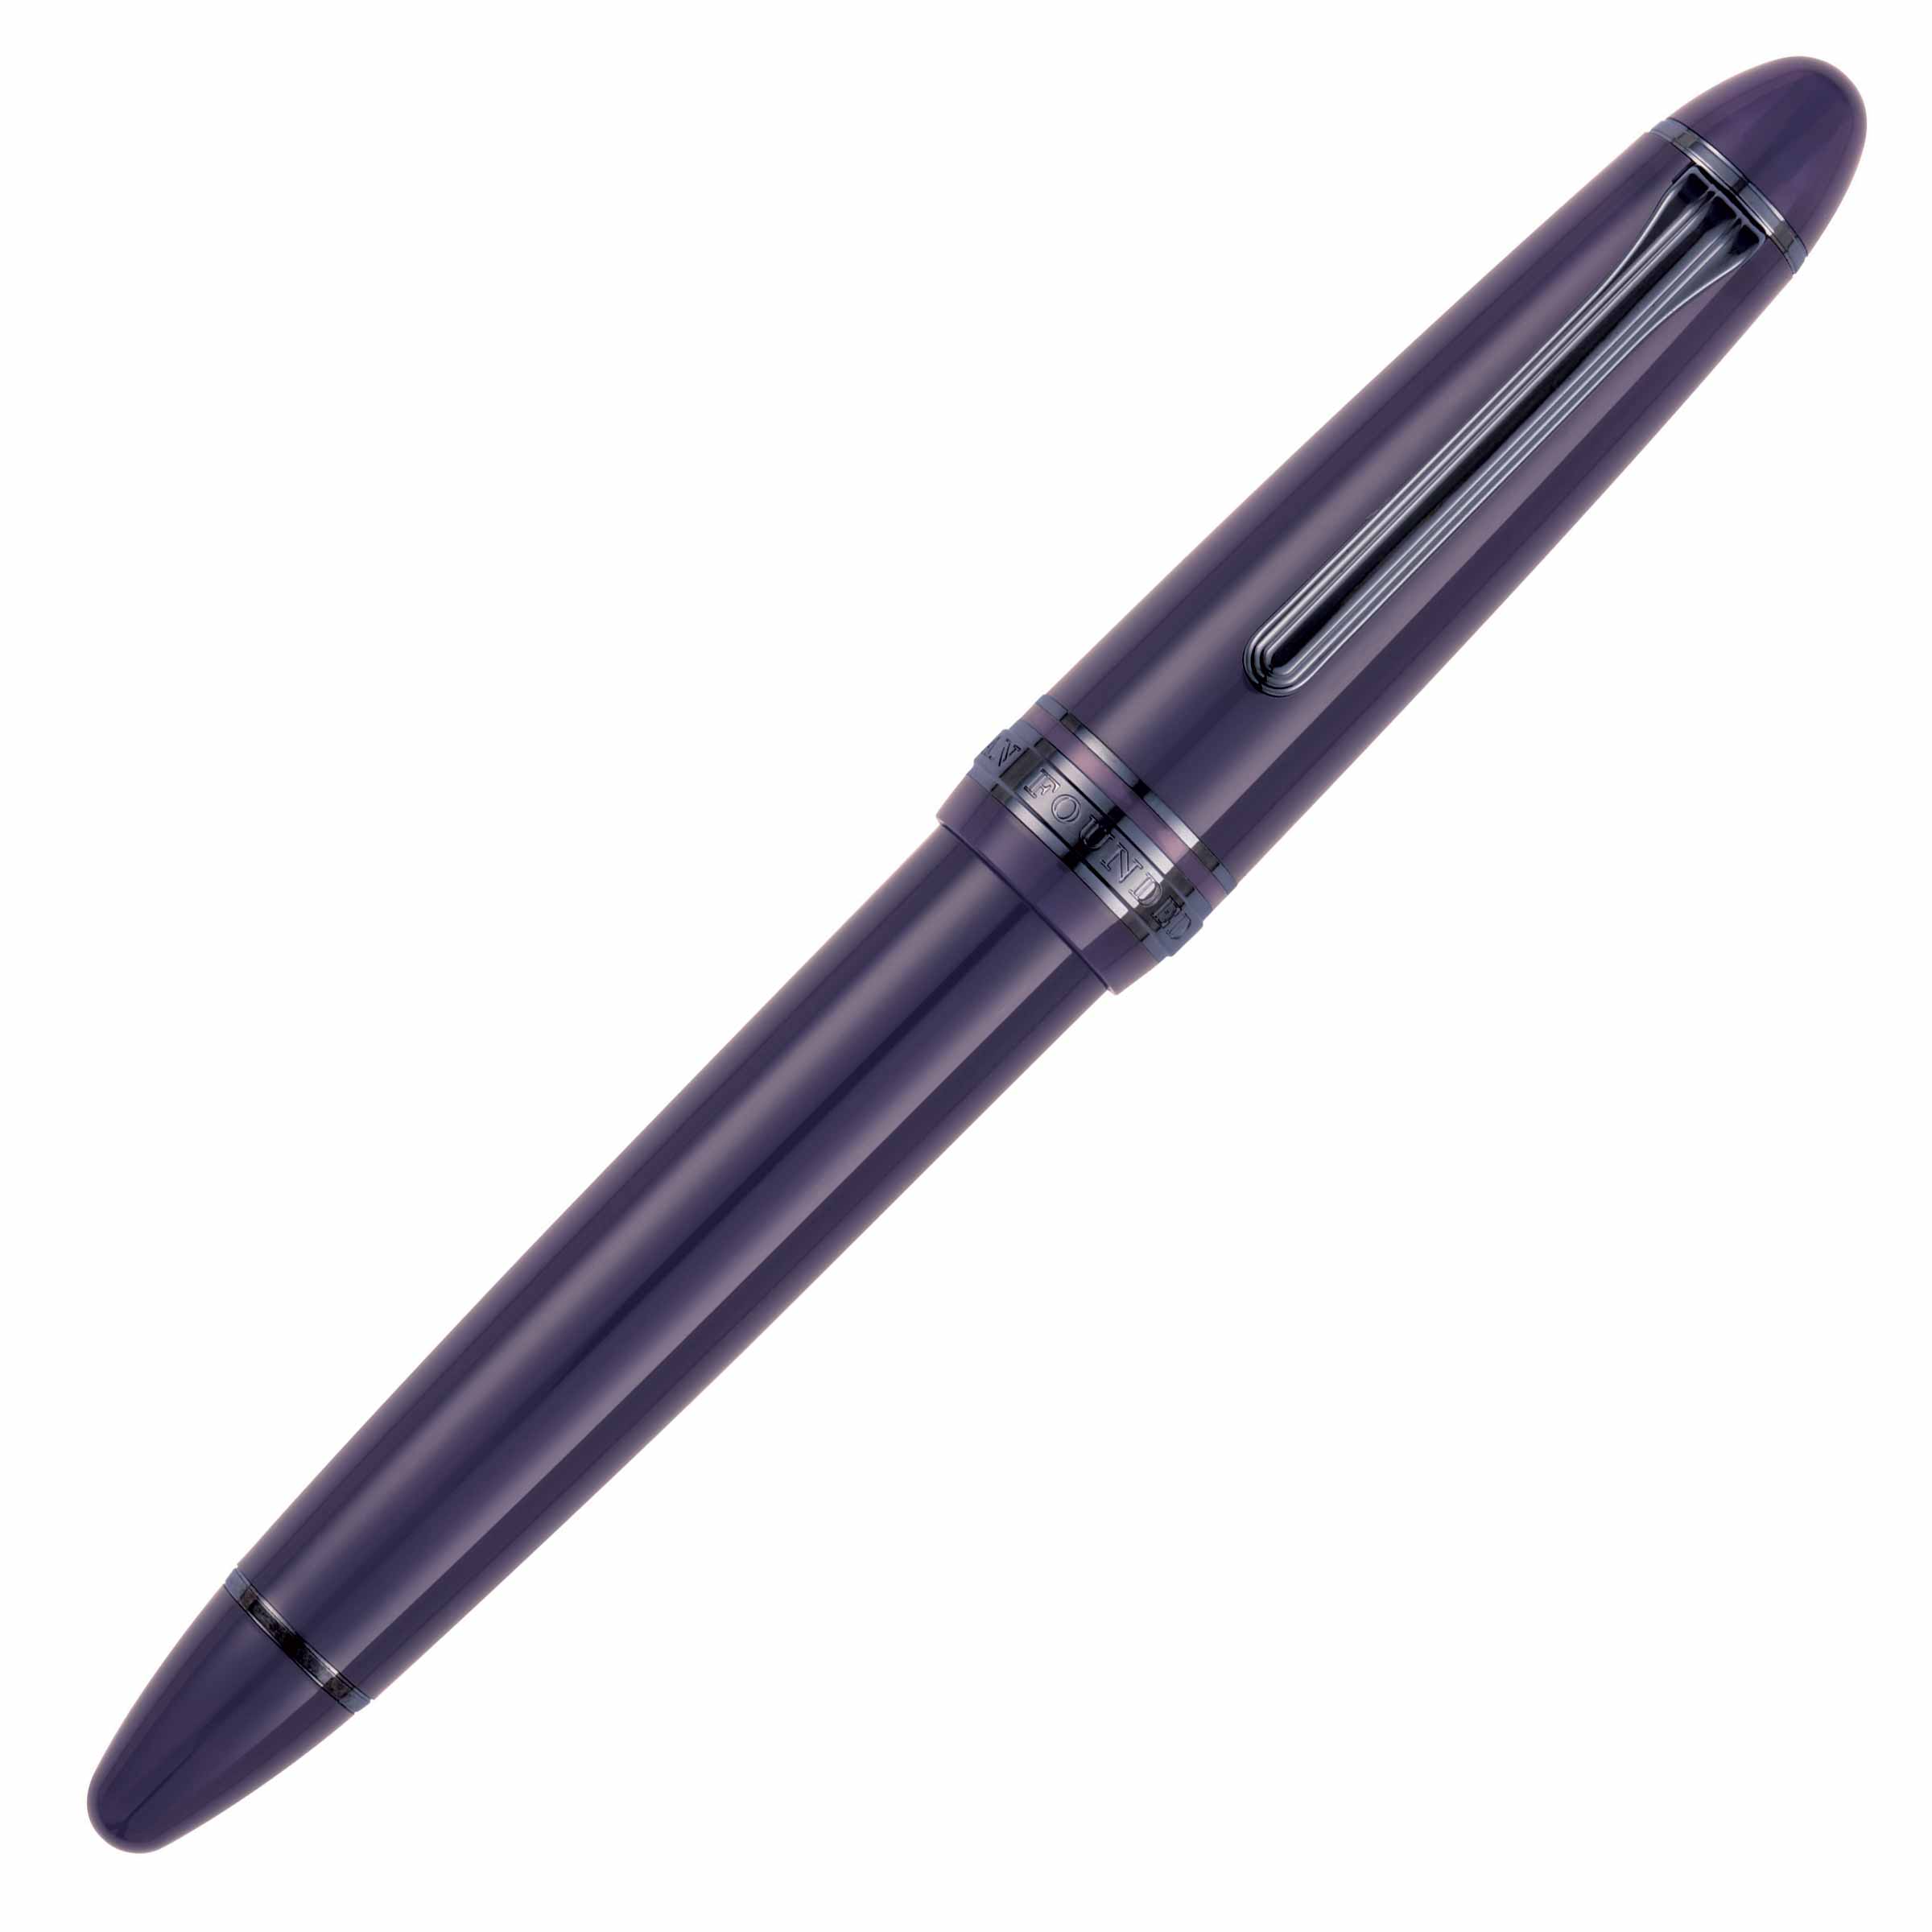 Witchy Pen 